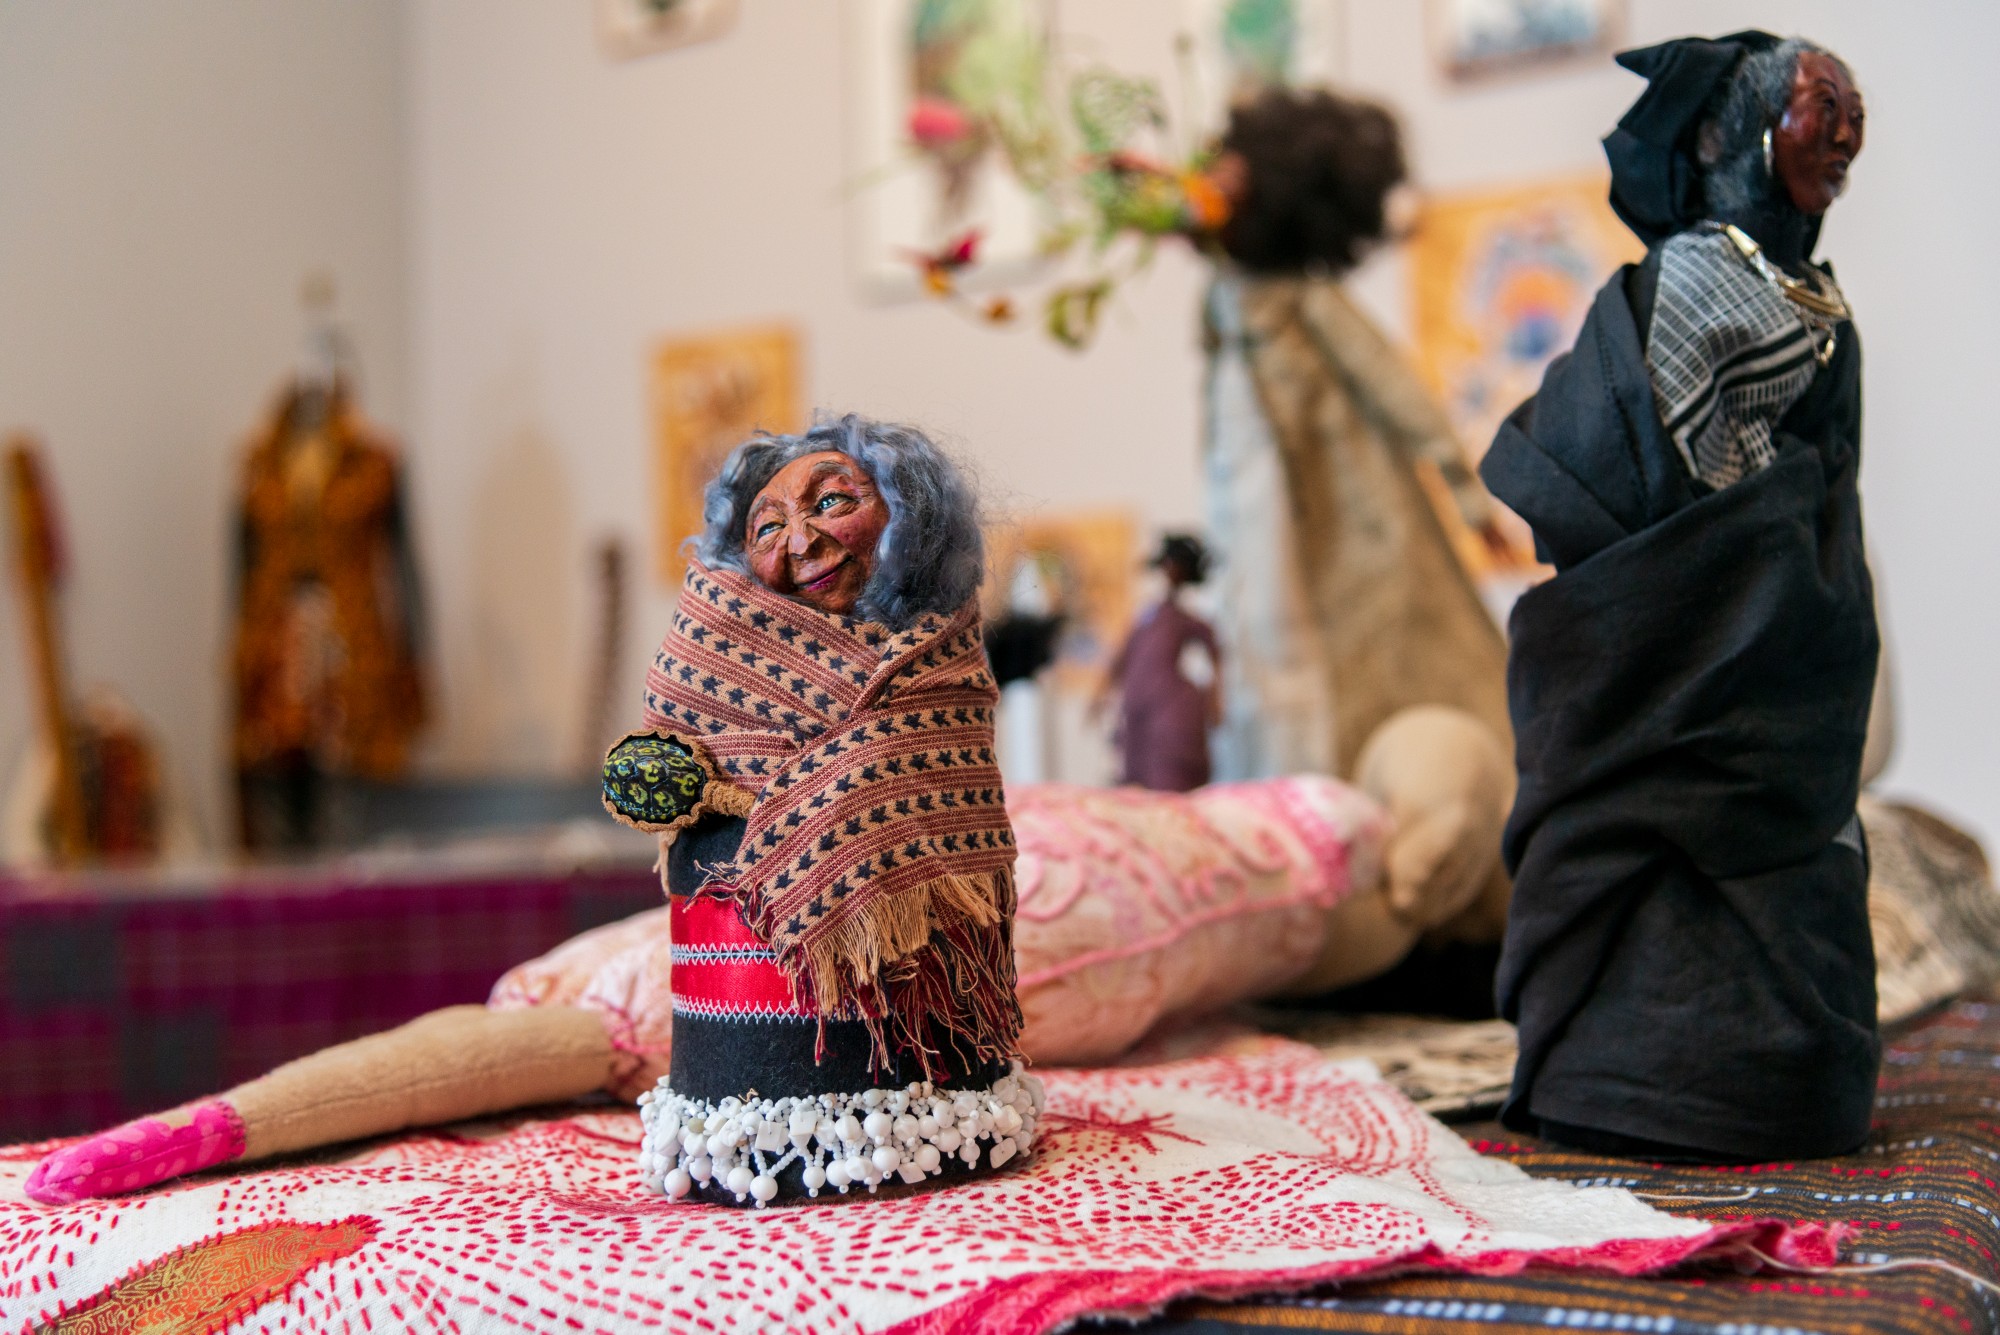 Yo Mama’s House, an artist, activist and healer cooperative, celebrates Black History Month and Women’s History Month with a pop-up display at the Weisman Art Museum on Saturday, Feb. 15. (Emily Urfer / Minnesota Daily)